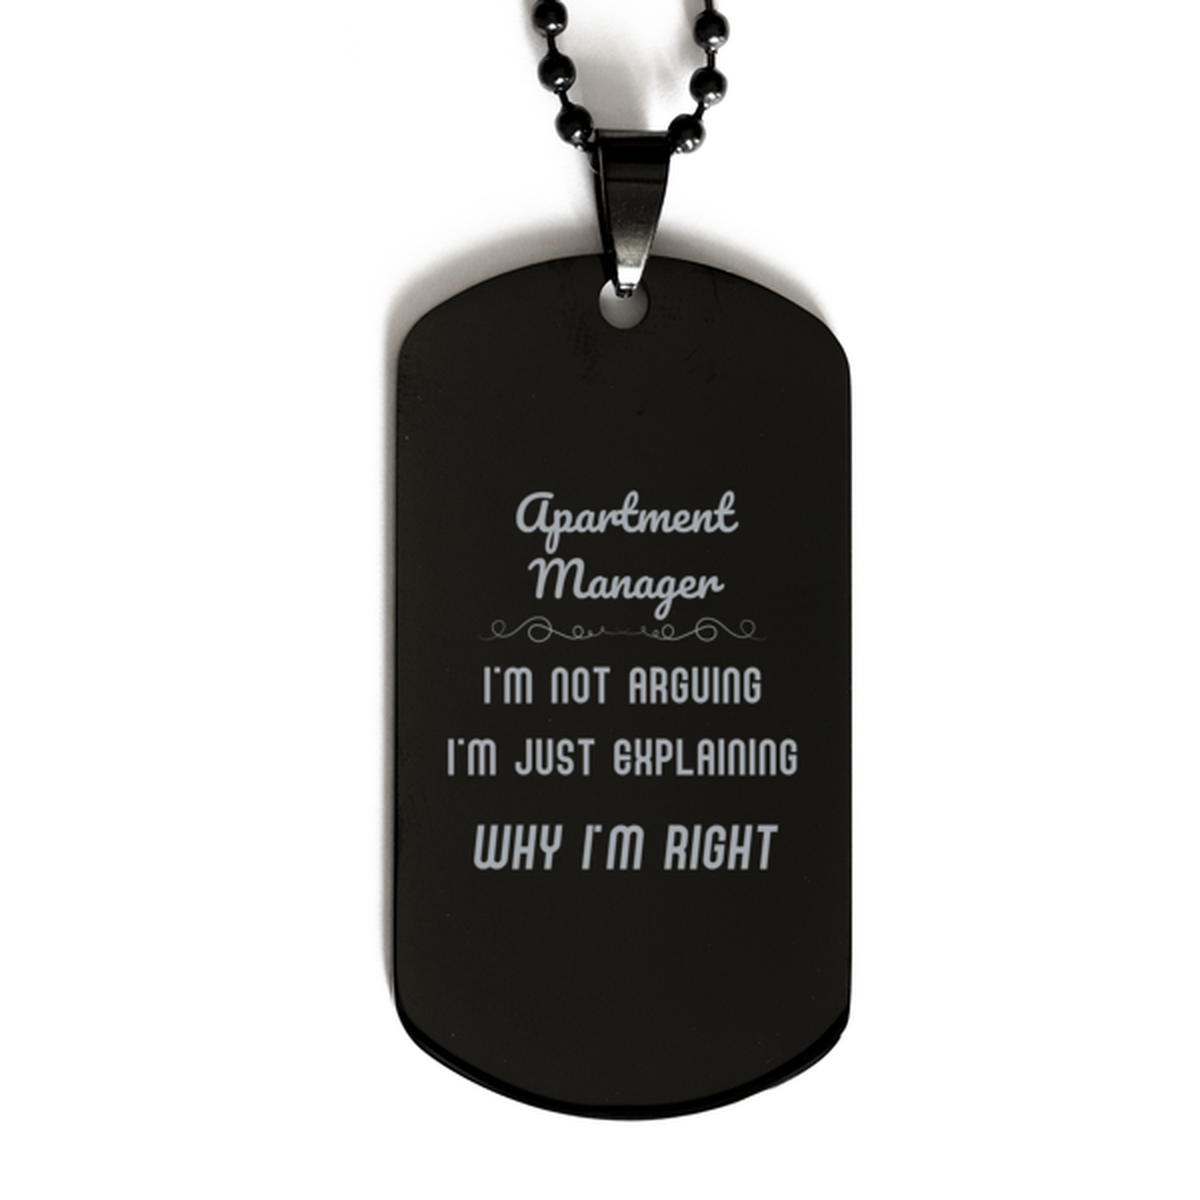 Apartment Manager I'm not Arguing. I'm Just Explaining Why I'm RIGHT Black Dog Tag, Funny Saying Quote Apartment Manager Gifts For Apartment Manager Graduation Birthday Christmas Gifts for Men Women Coworker